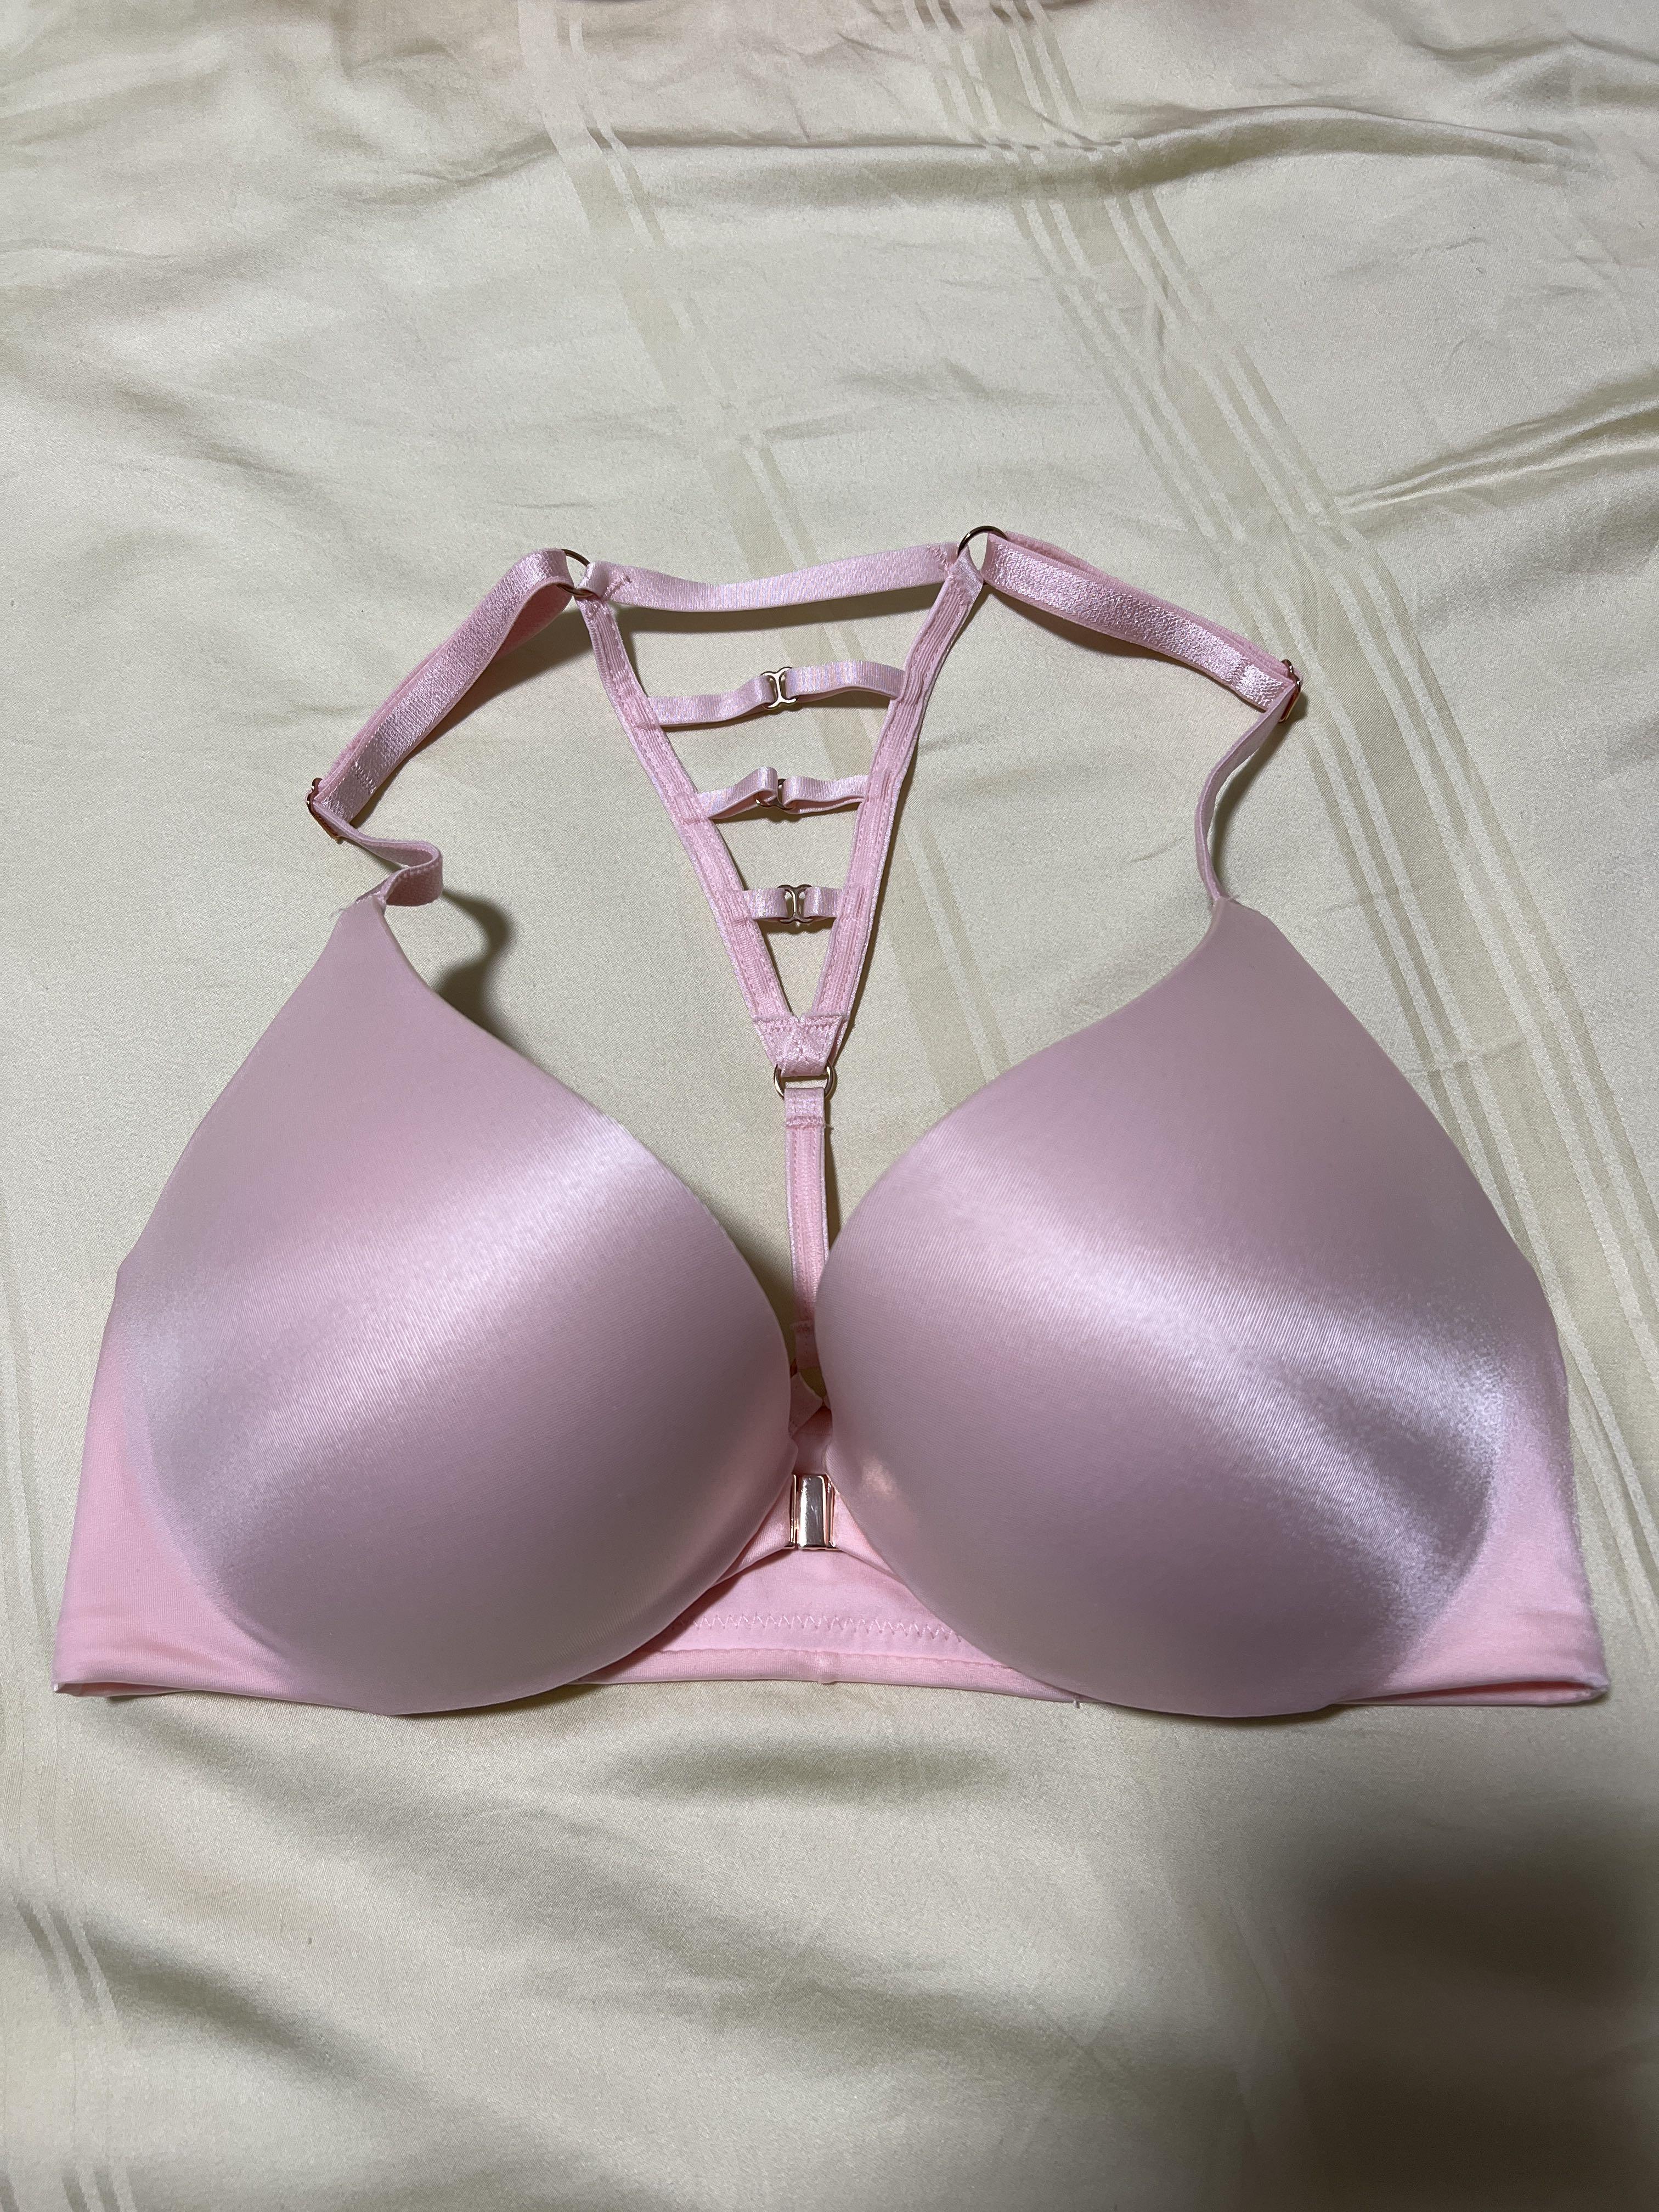 32C Victoria's secret So Obsessed pink front clip bra, Women's Fashion, New  Undergarments & Loungewear on Carousell